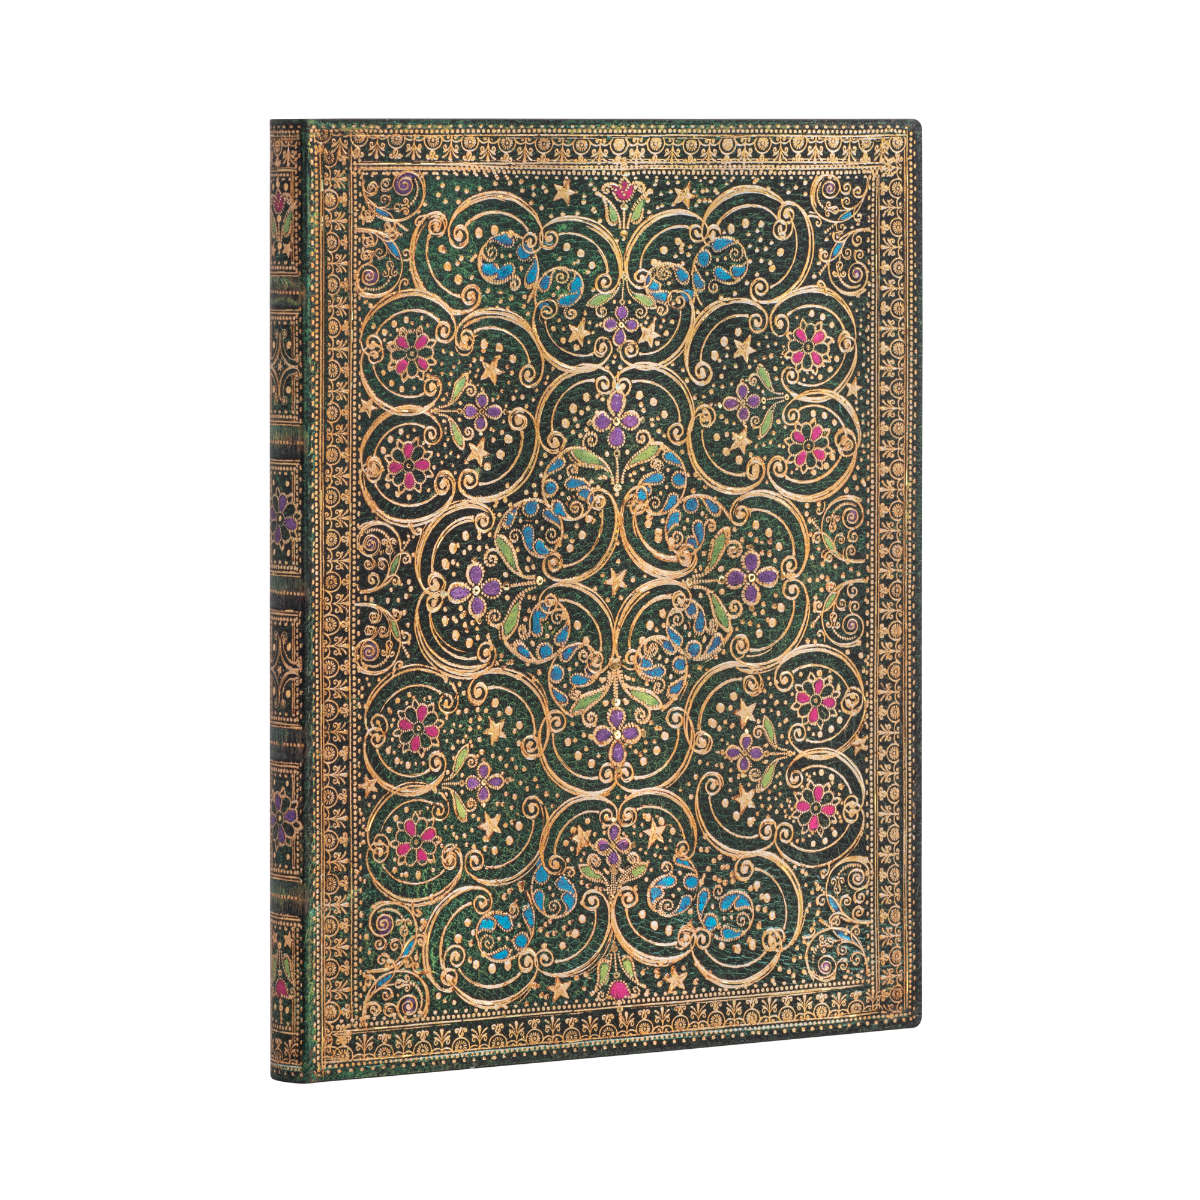 Paperblanks Flexis Pinnacle - The Queen's Binding Ultra 7 x 9 Inch Journal